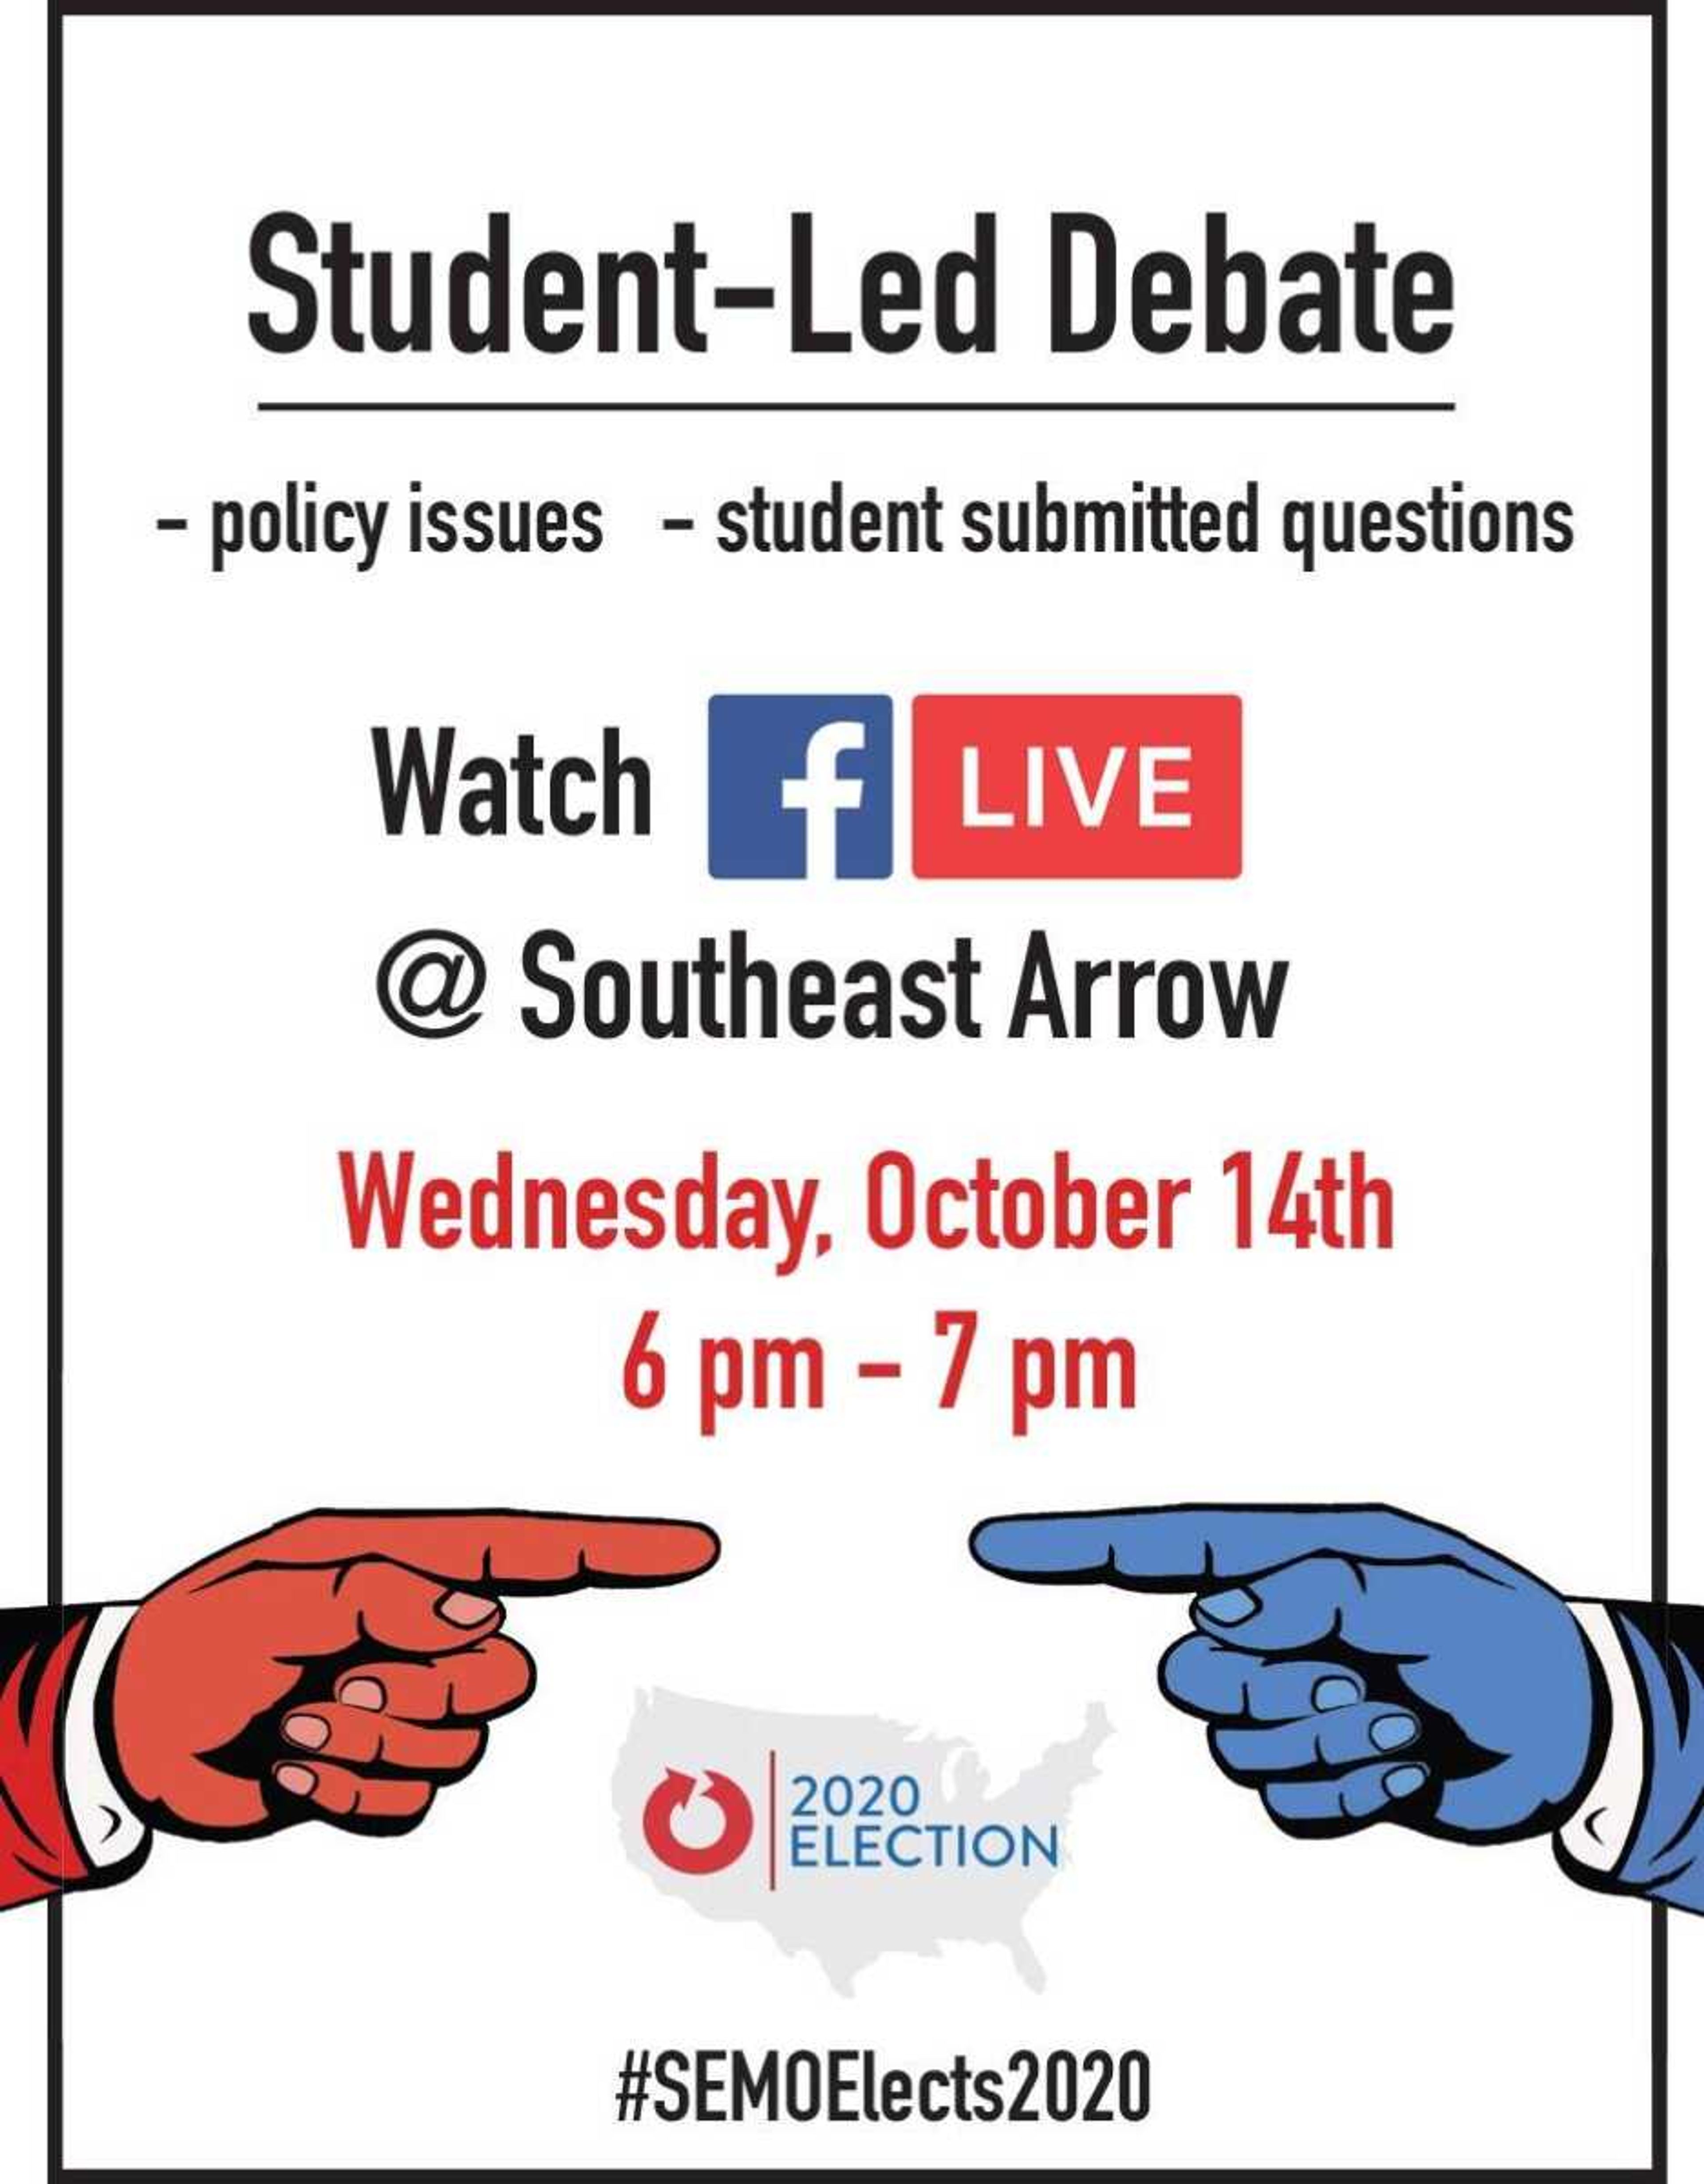 The debate is the first of three events in the Arrow’s 2020 Election coverage. The second will be the print edition ahead of the election, and the third will be the Election Night coverage itself.